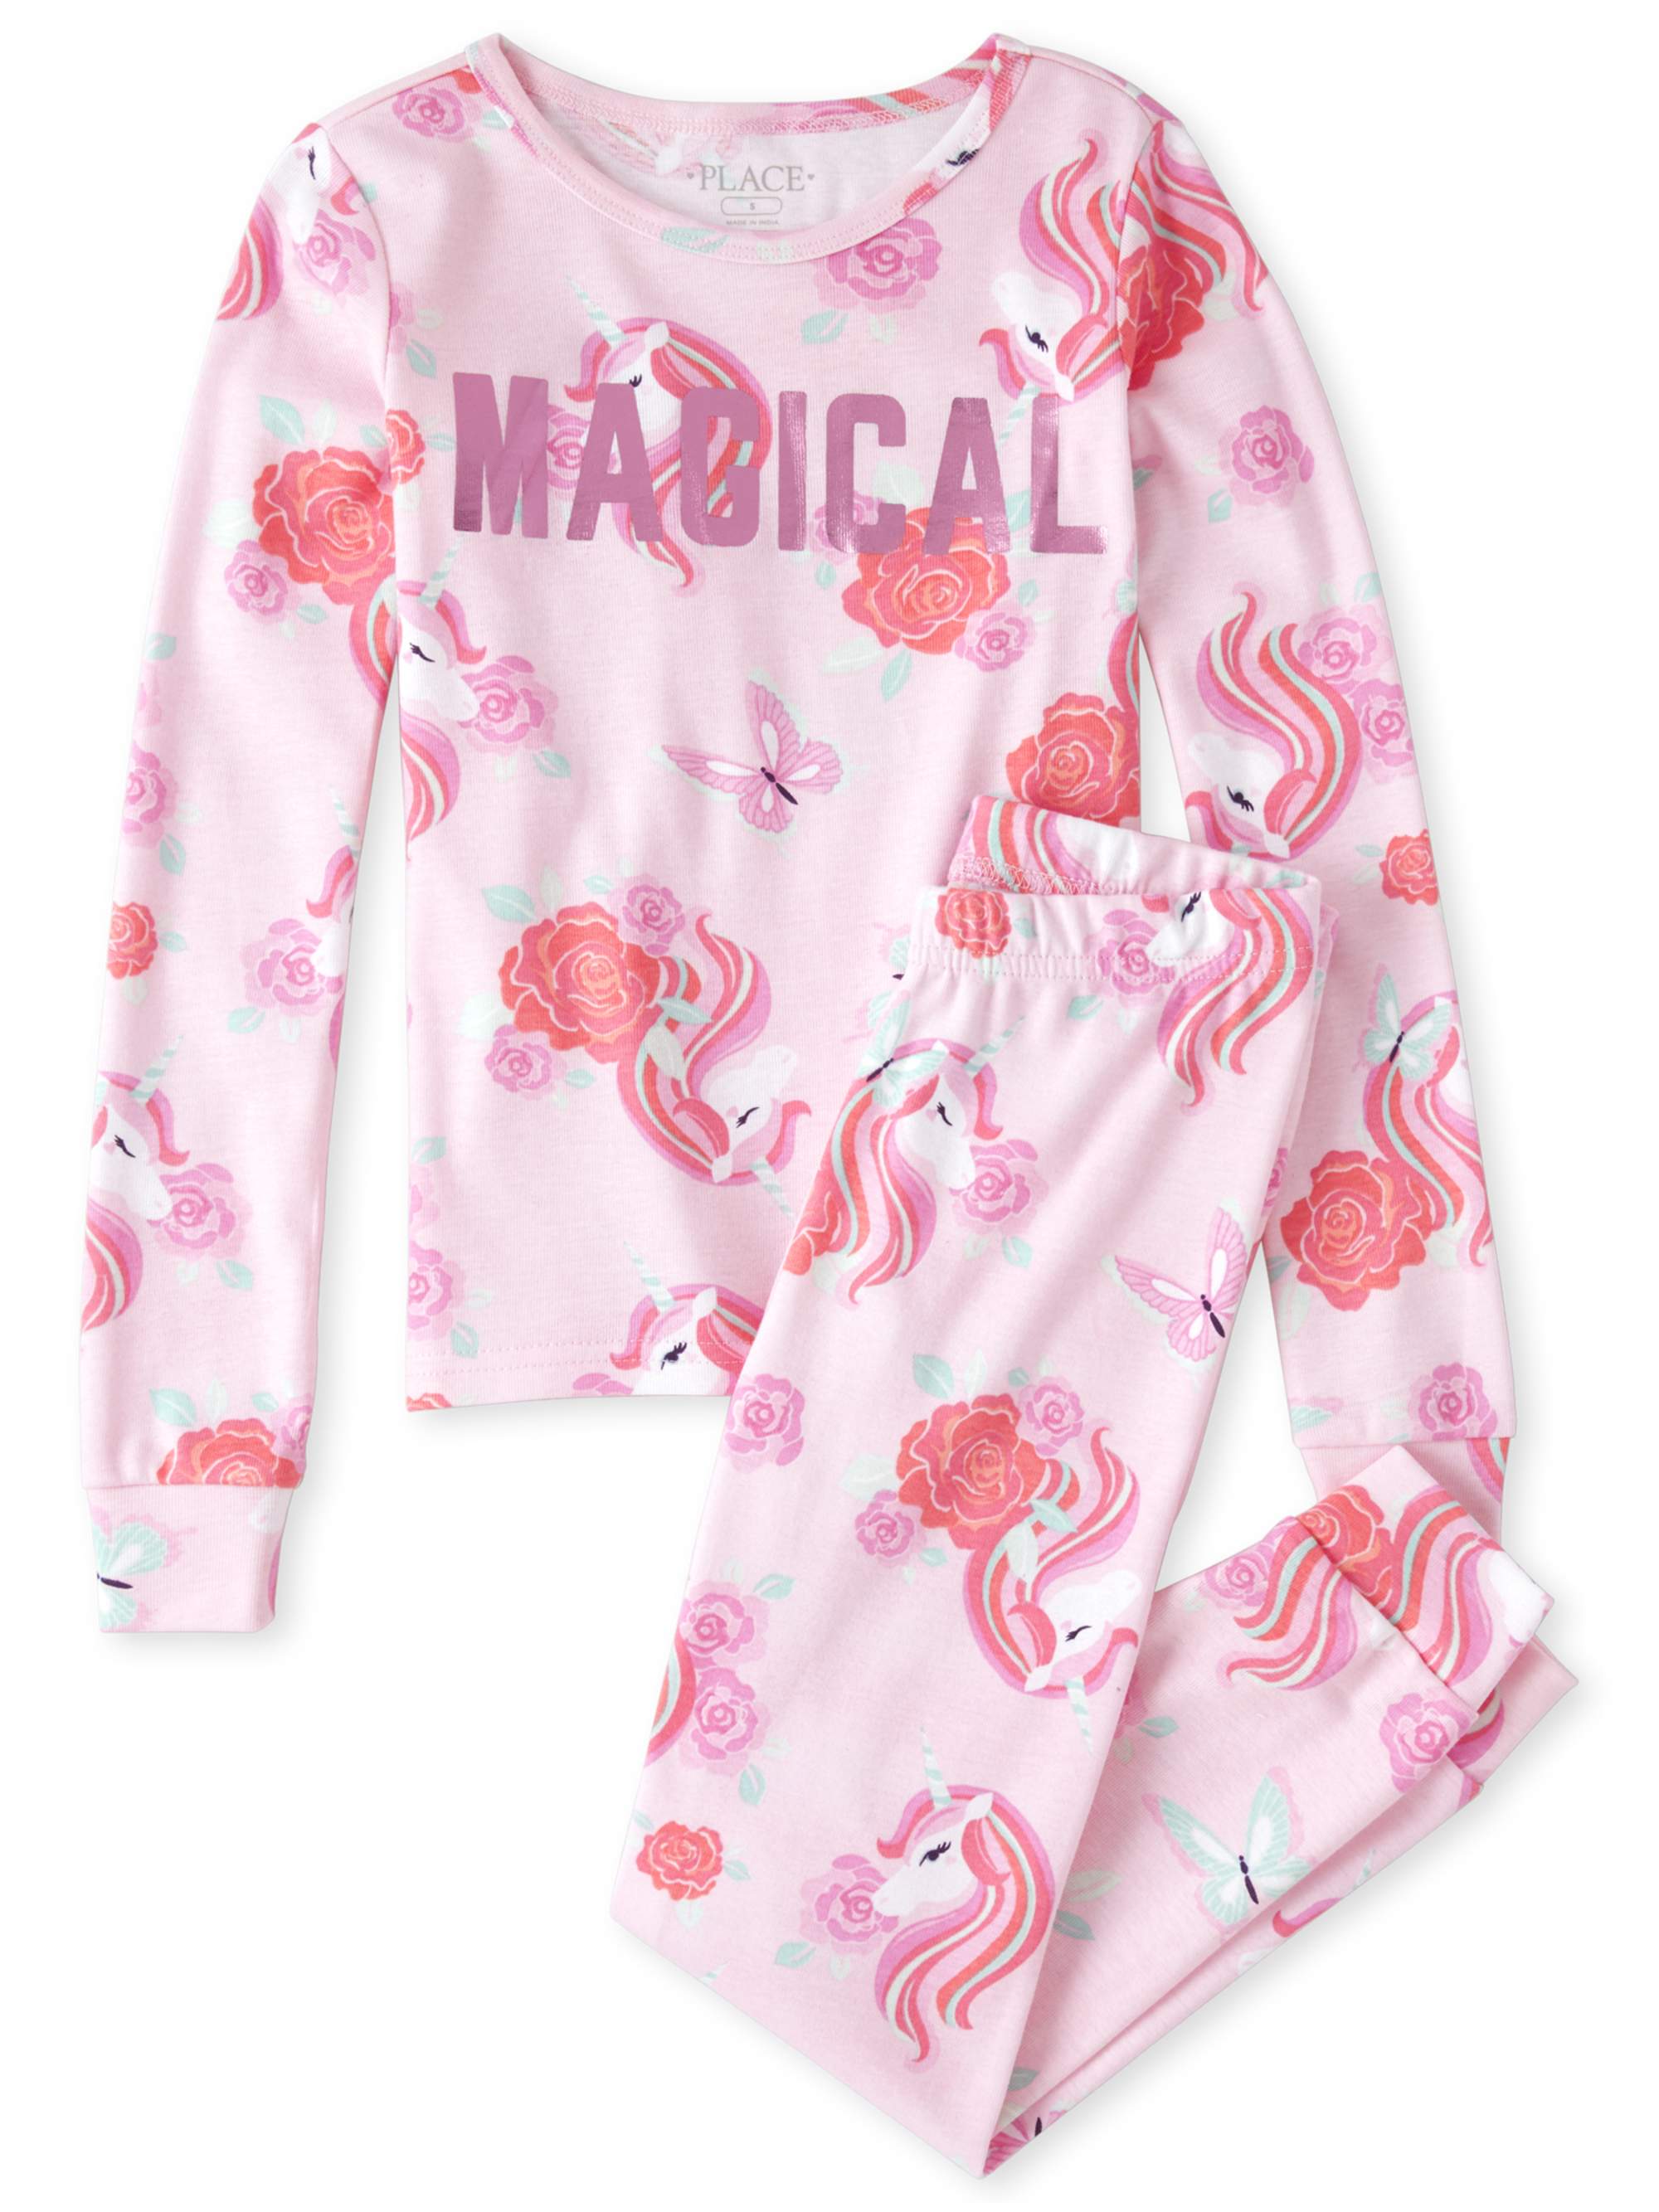 The Childrens Place 'Magical' Long Sleeve All Around Unicorn Rose Print Pajama Pant Set (Little Girls and Big Girls) - image 1 of 1